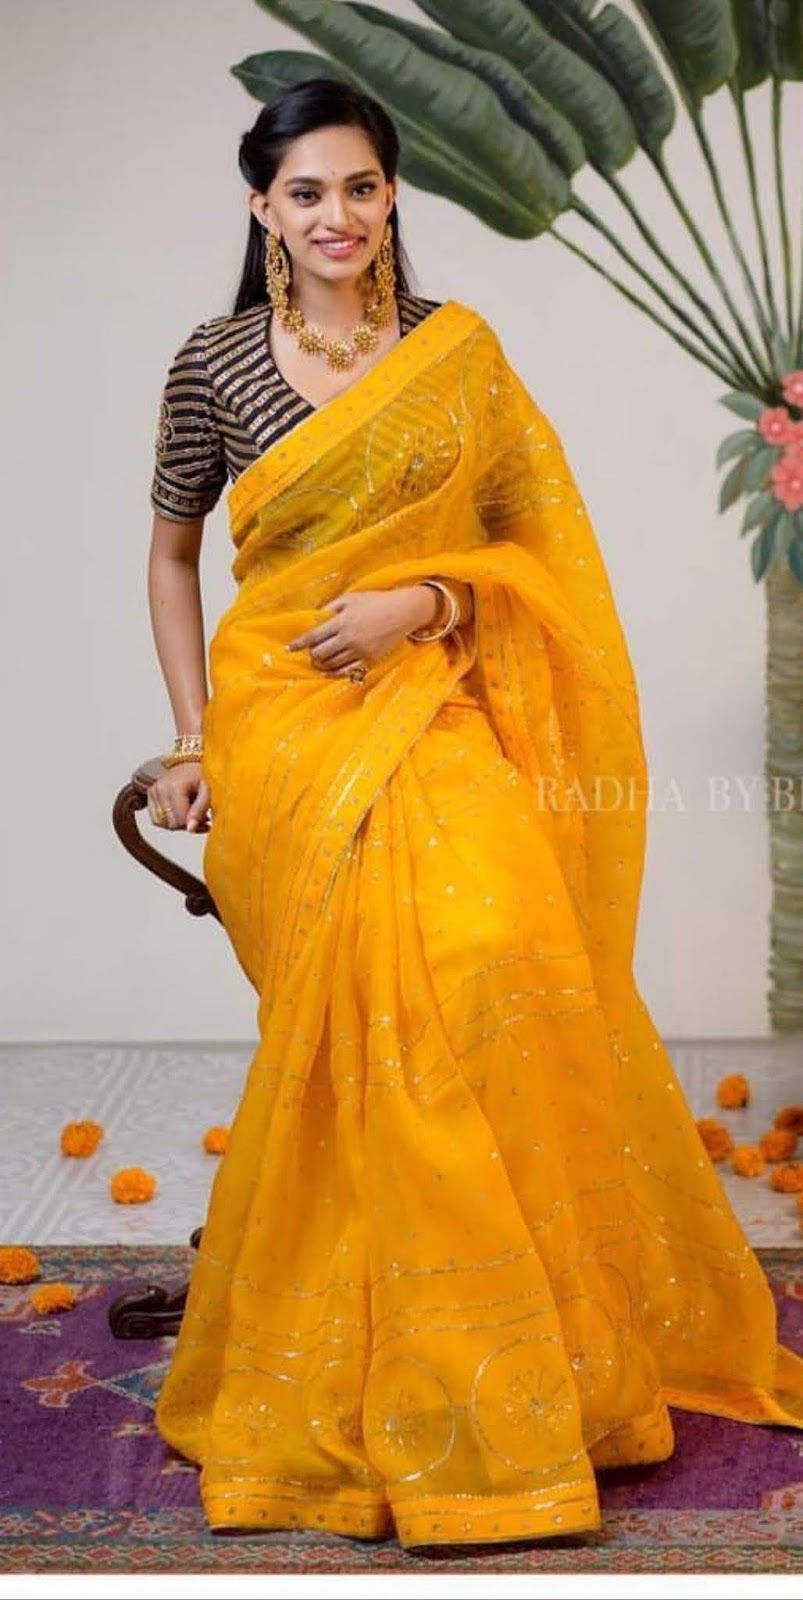 How To Wear The Saree Methods Blouse (190)